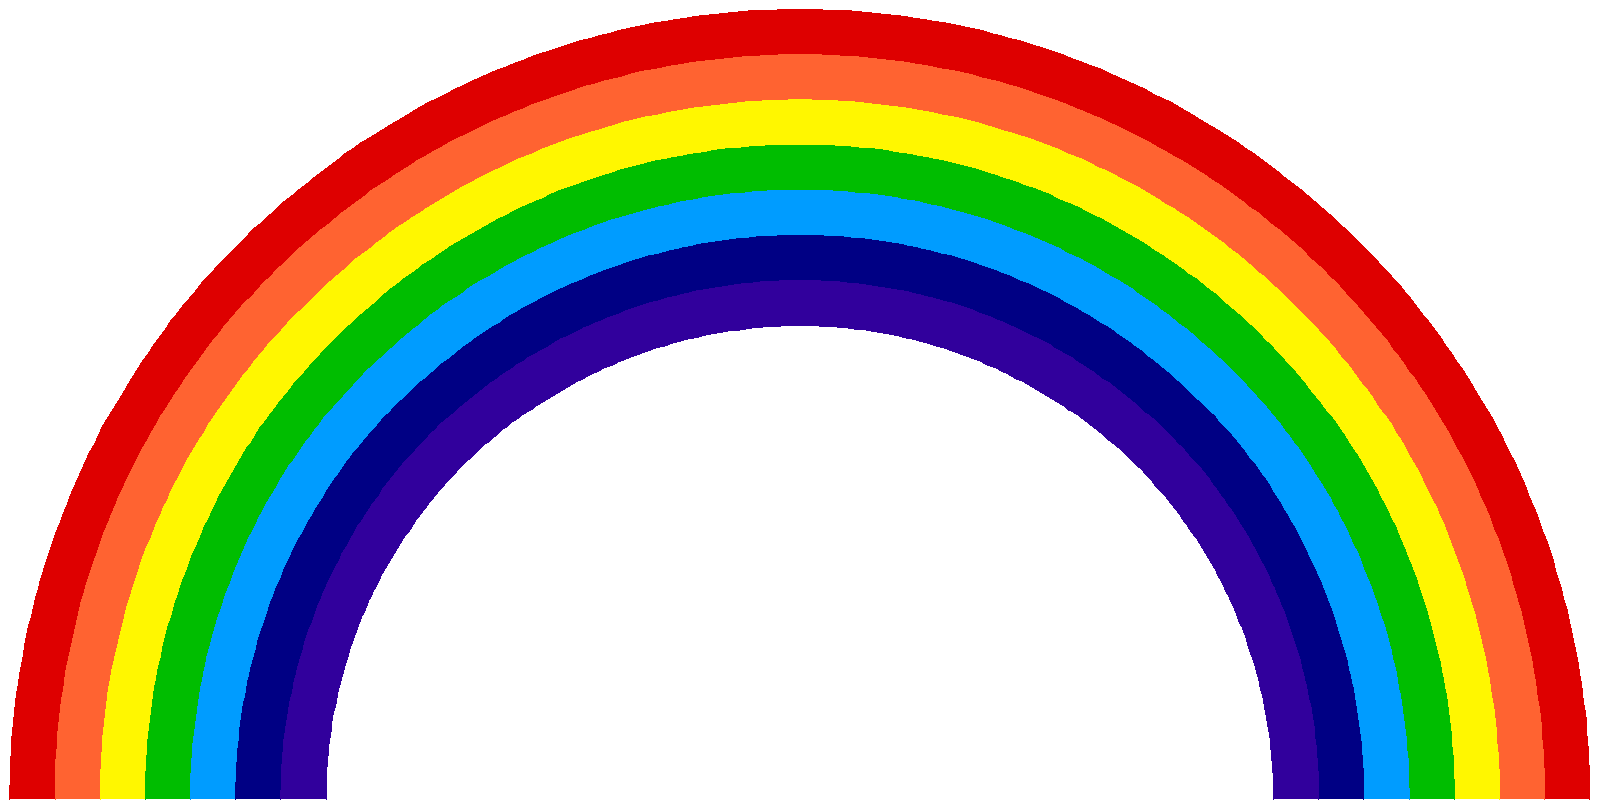 rainbow clipart free download - photo #11